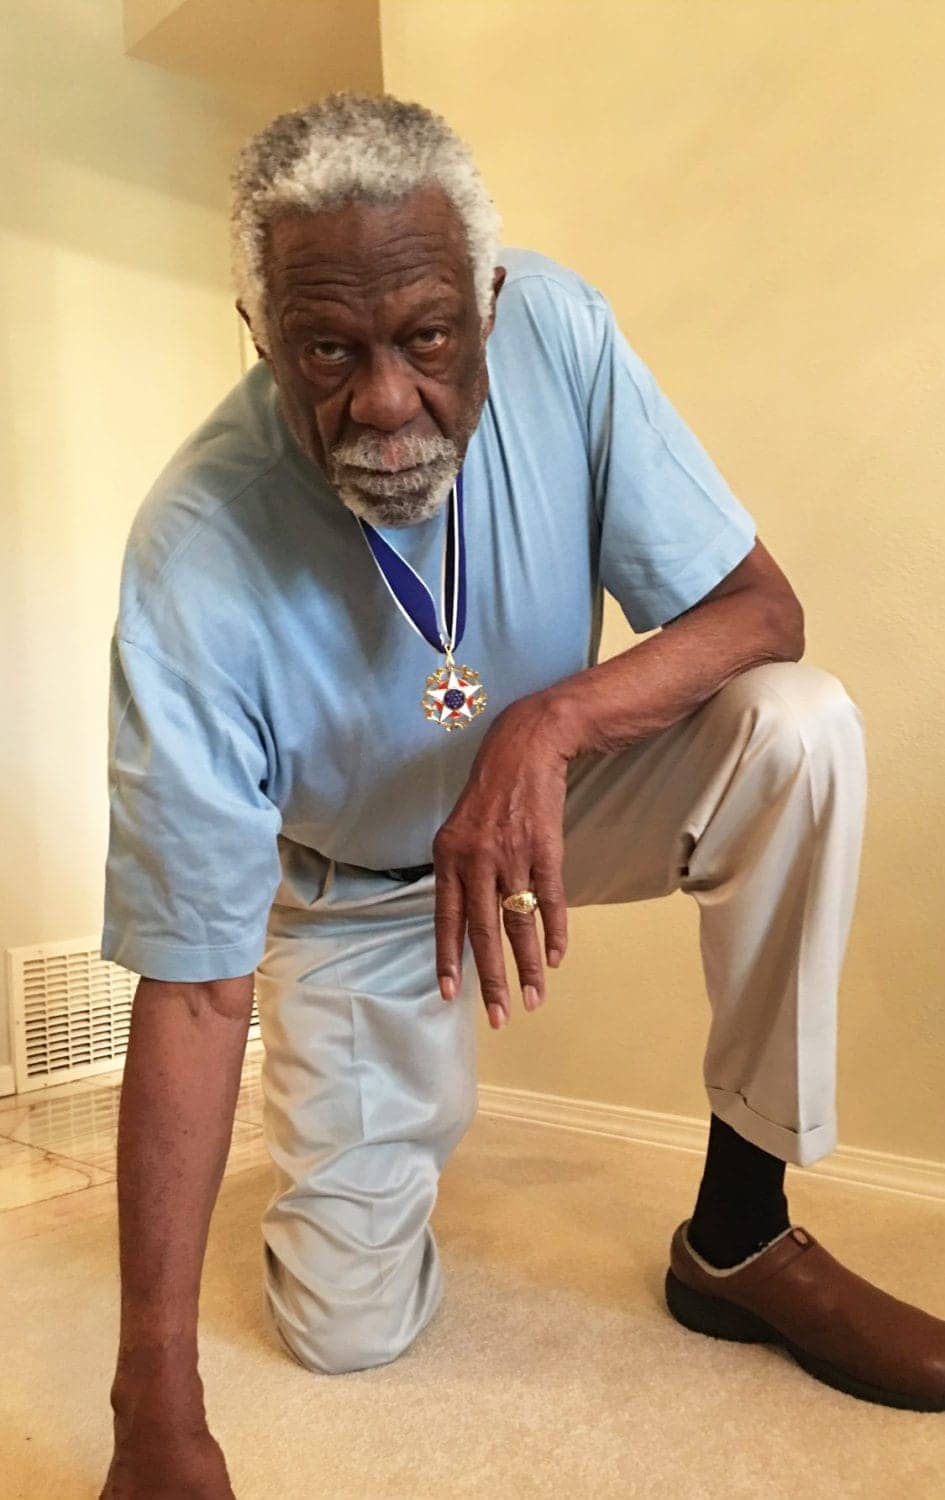 Bill-Russell-takes-a-knee-wearing-PresidentIal-Medal-of-Freedom-from-Obama-092617-by-Twitter-1, Bill Russell was a revolutionary, Culture Currents Featured News & Views 